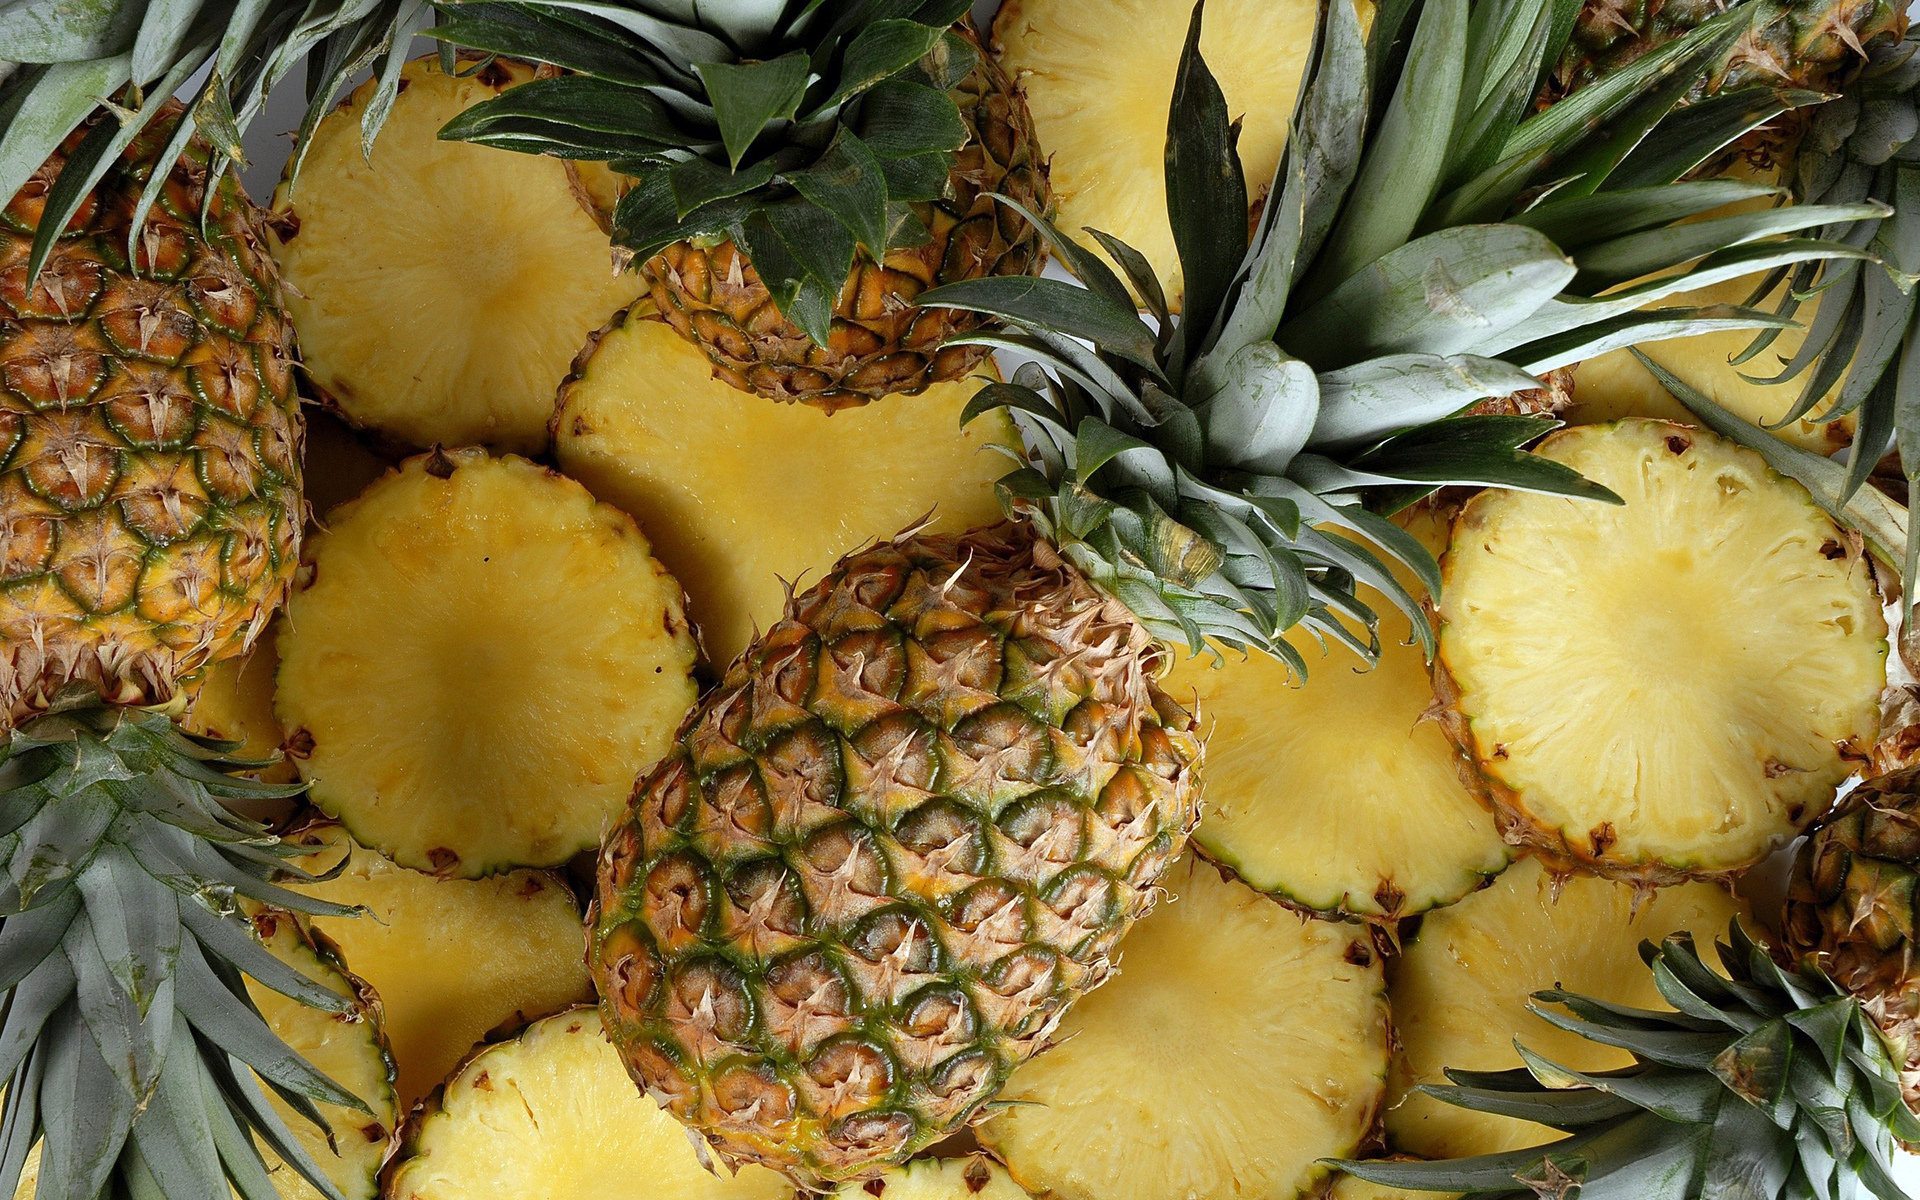  pineapple nutrition facts